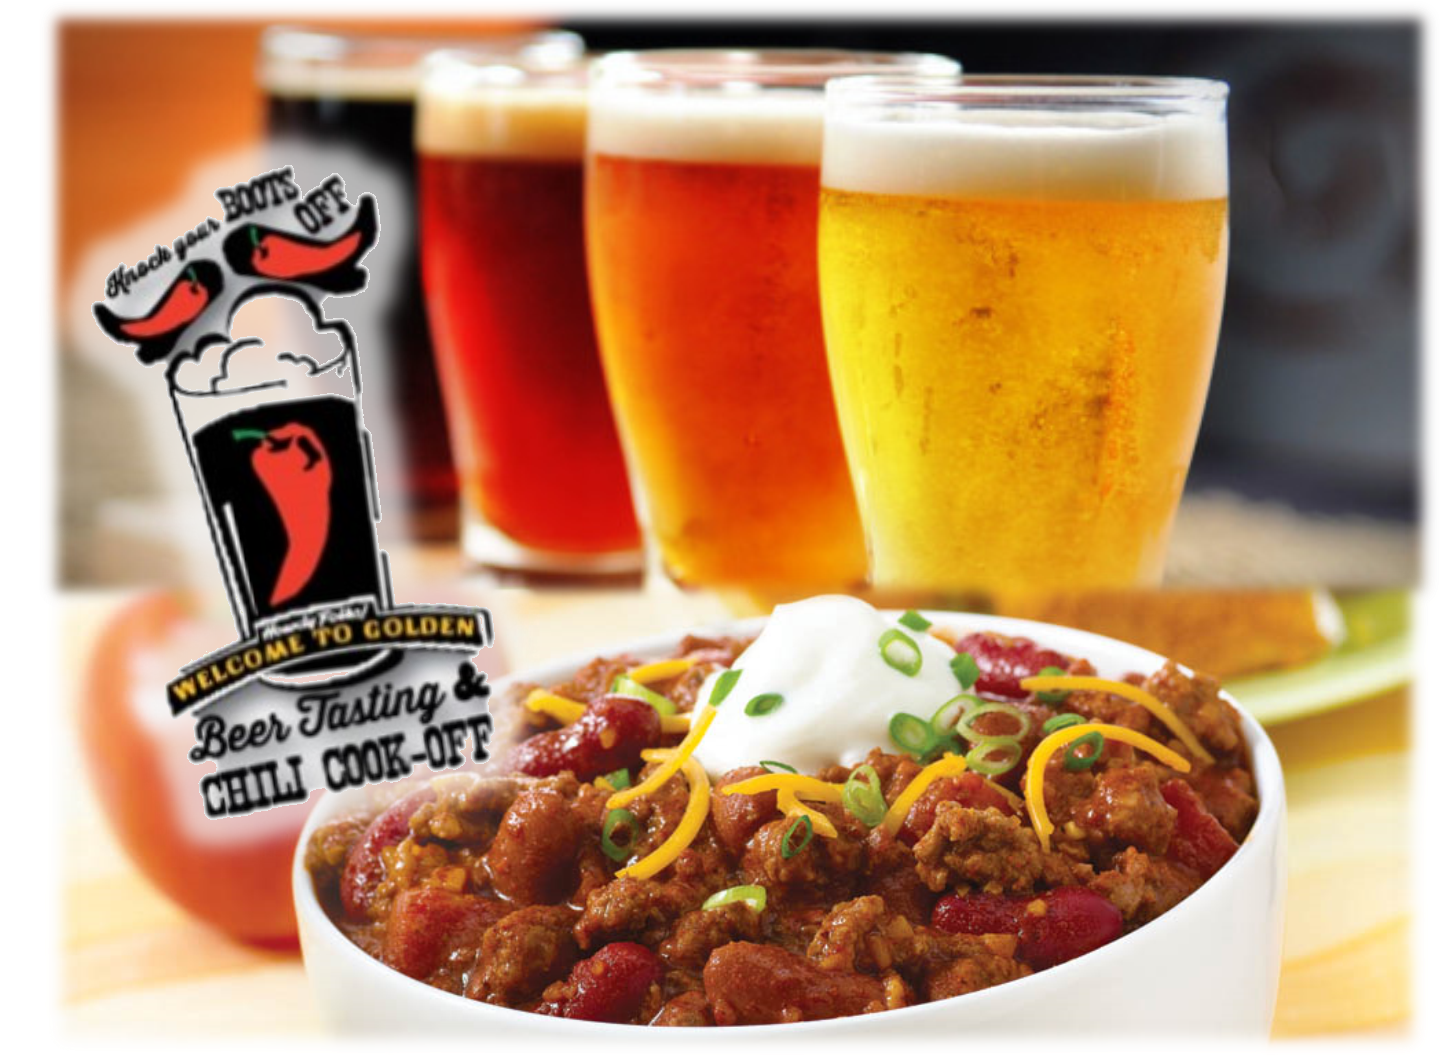 2018 Golden Chili Cook-Off and Beer Tasting